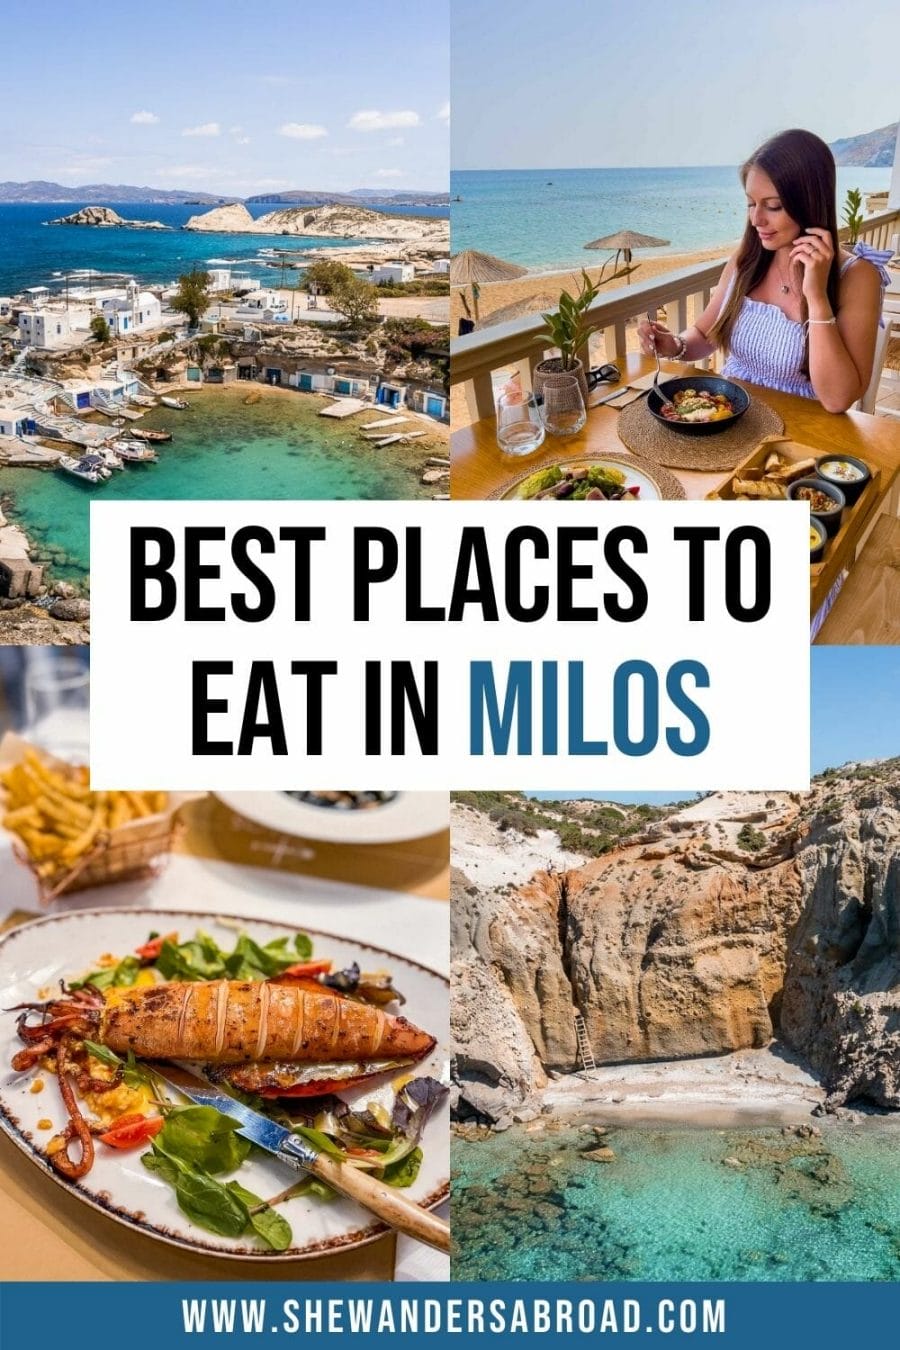 17 Best Restaurants in Milos You Have to Try